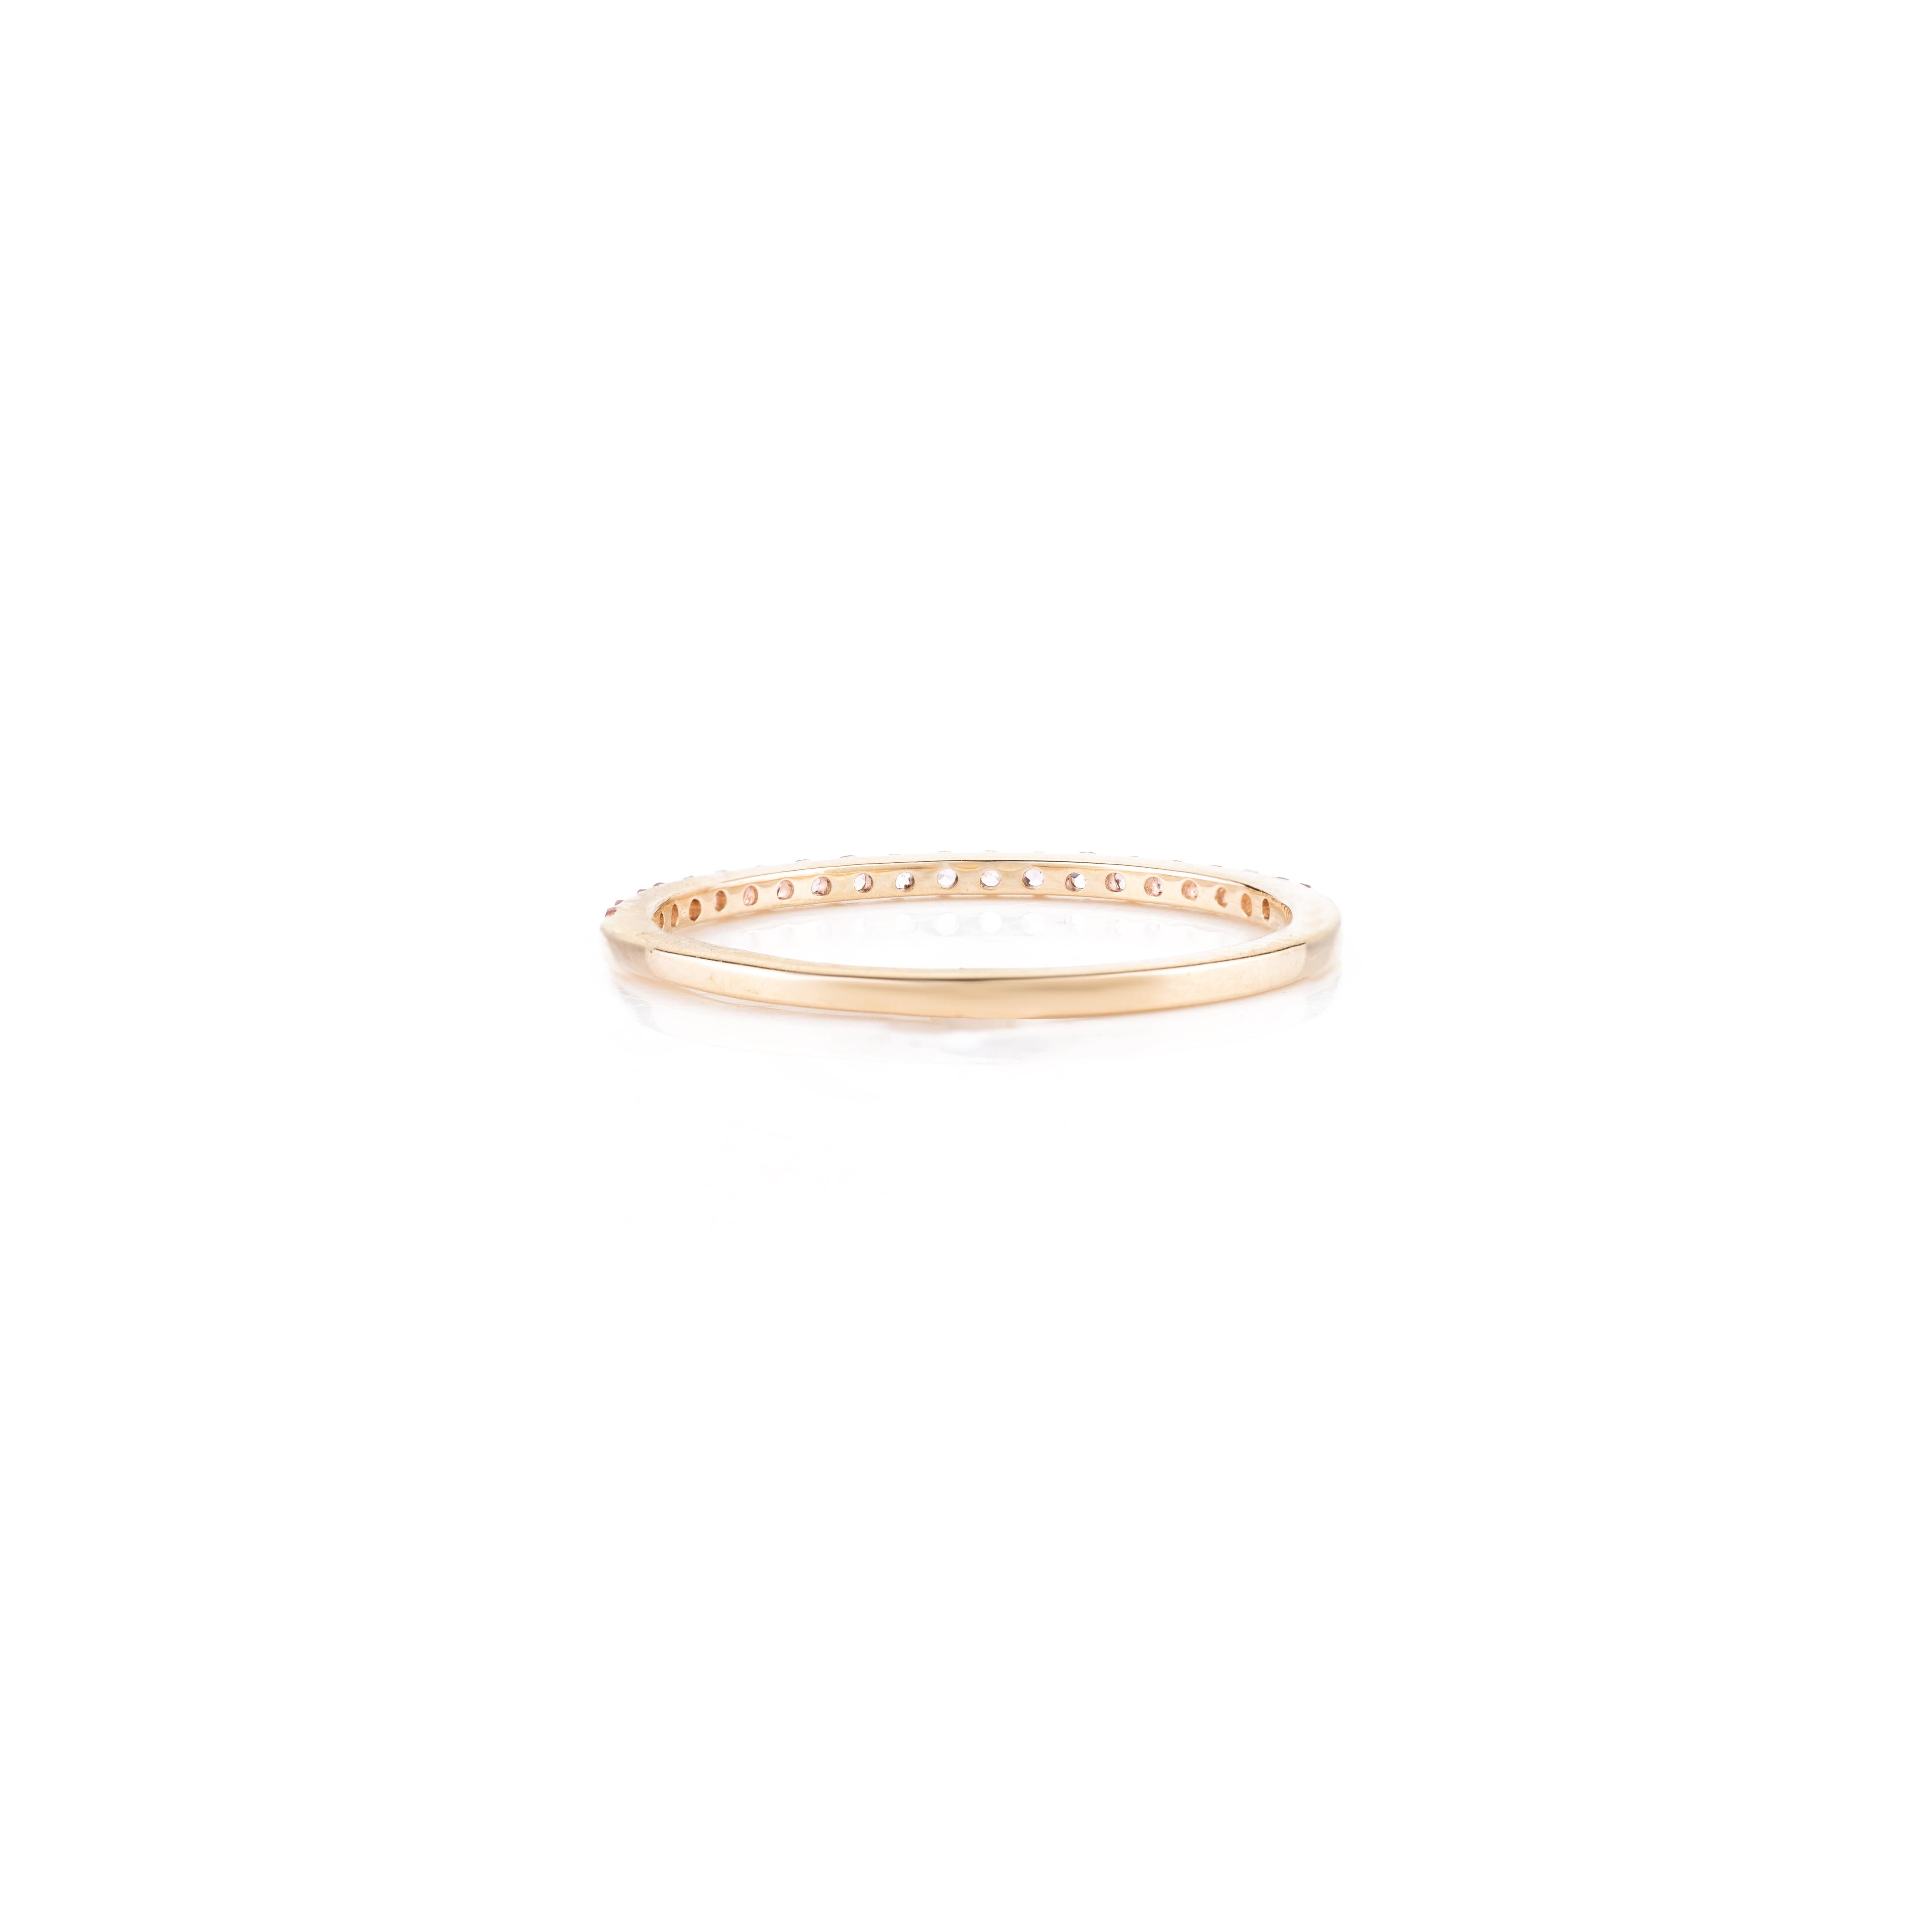 For Sale:  Stackable Thin 14k Solid Yellow Gold Tourmaline Band Ring Gift for Her 6